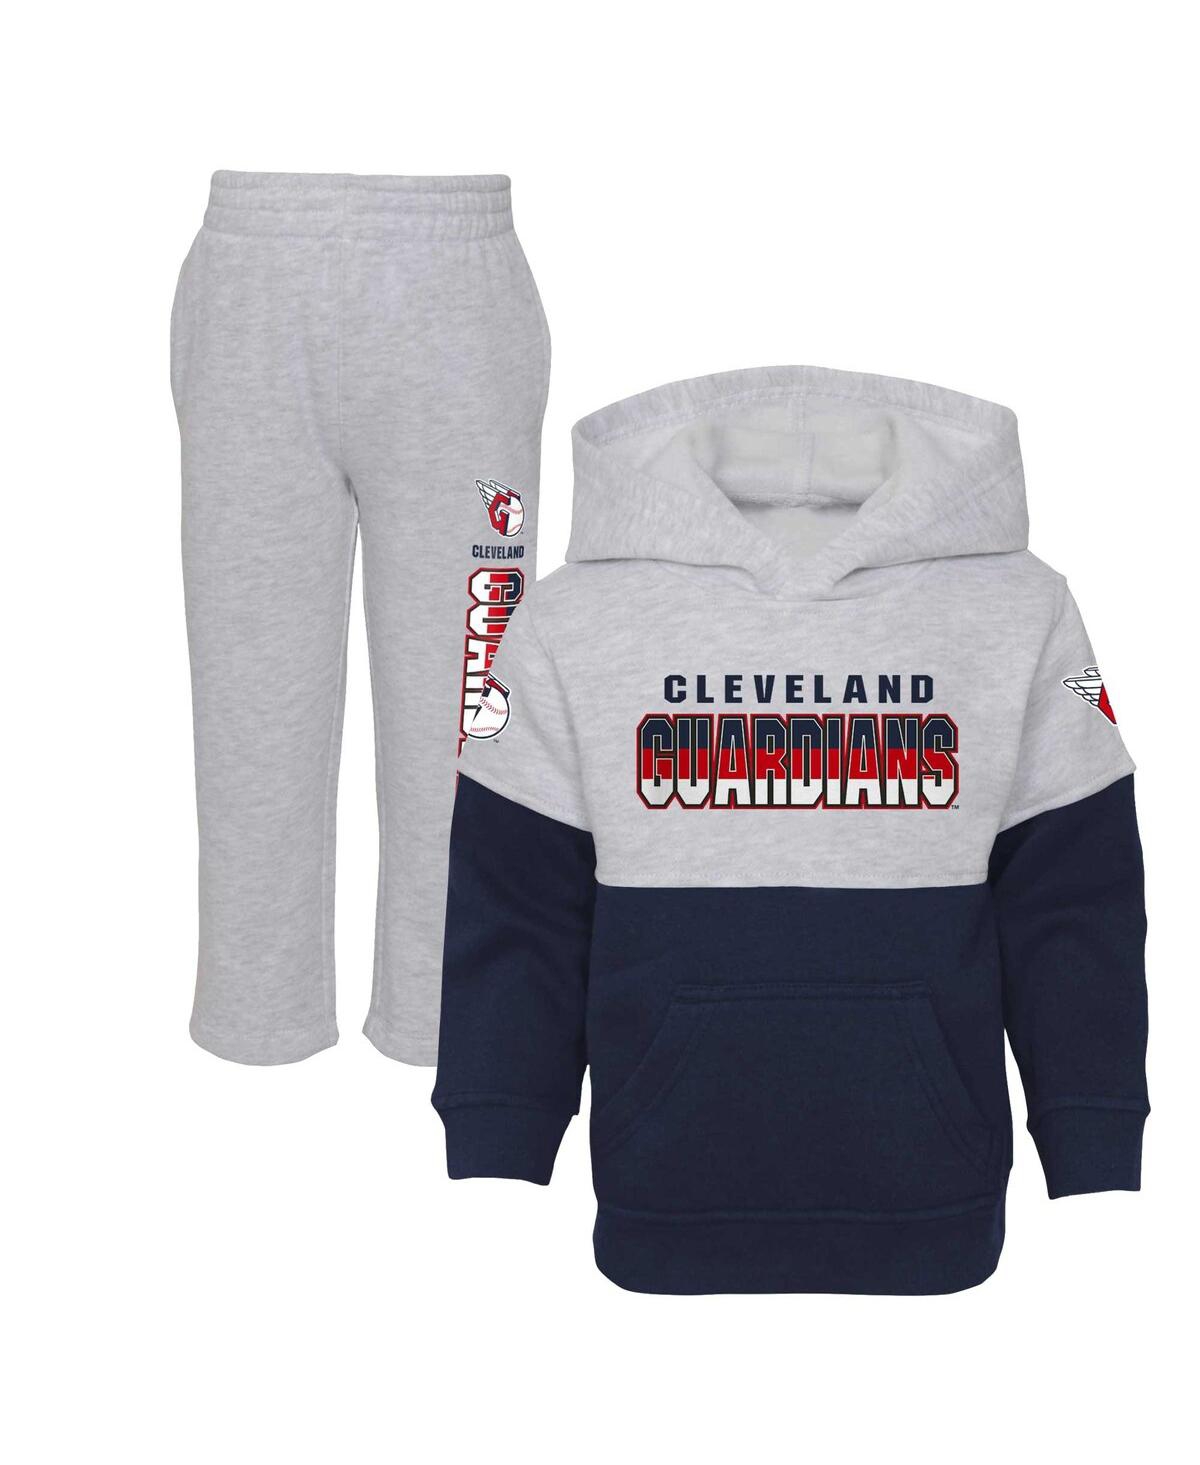 Outerstuff Babies' Toddler Boys And Girls Navy, Heather Gray Cleveland Guardians Two-piece Playmaker Set In Navy,heather Gray